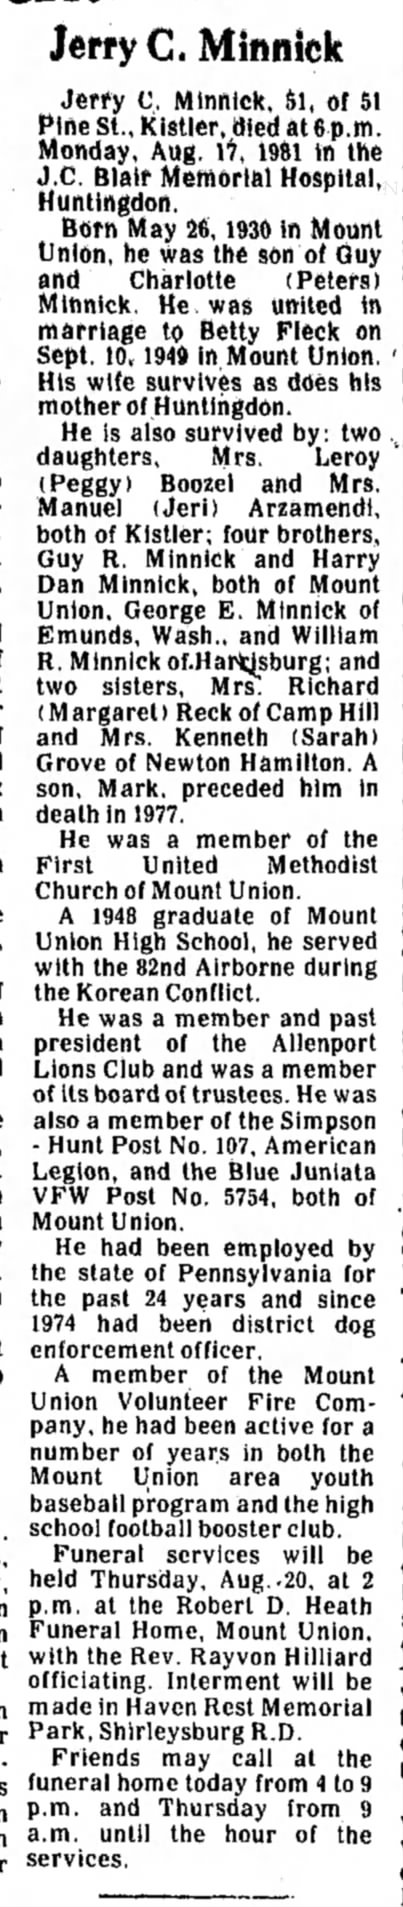 Jerry Minnick-Mt. Union-obit-TDN-page 2-19 August 1981